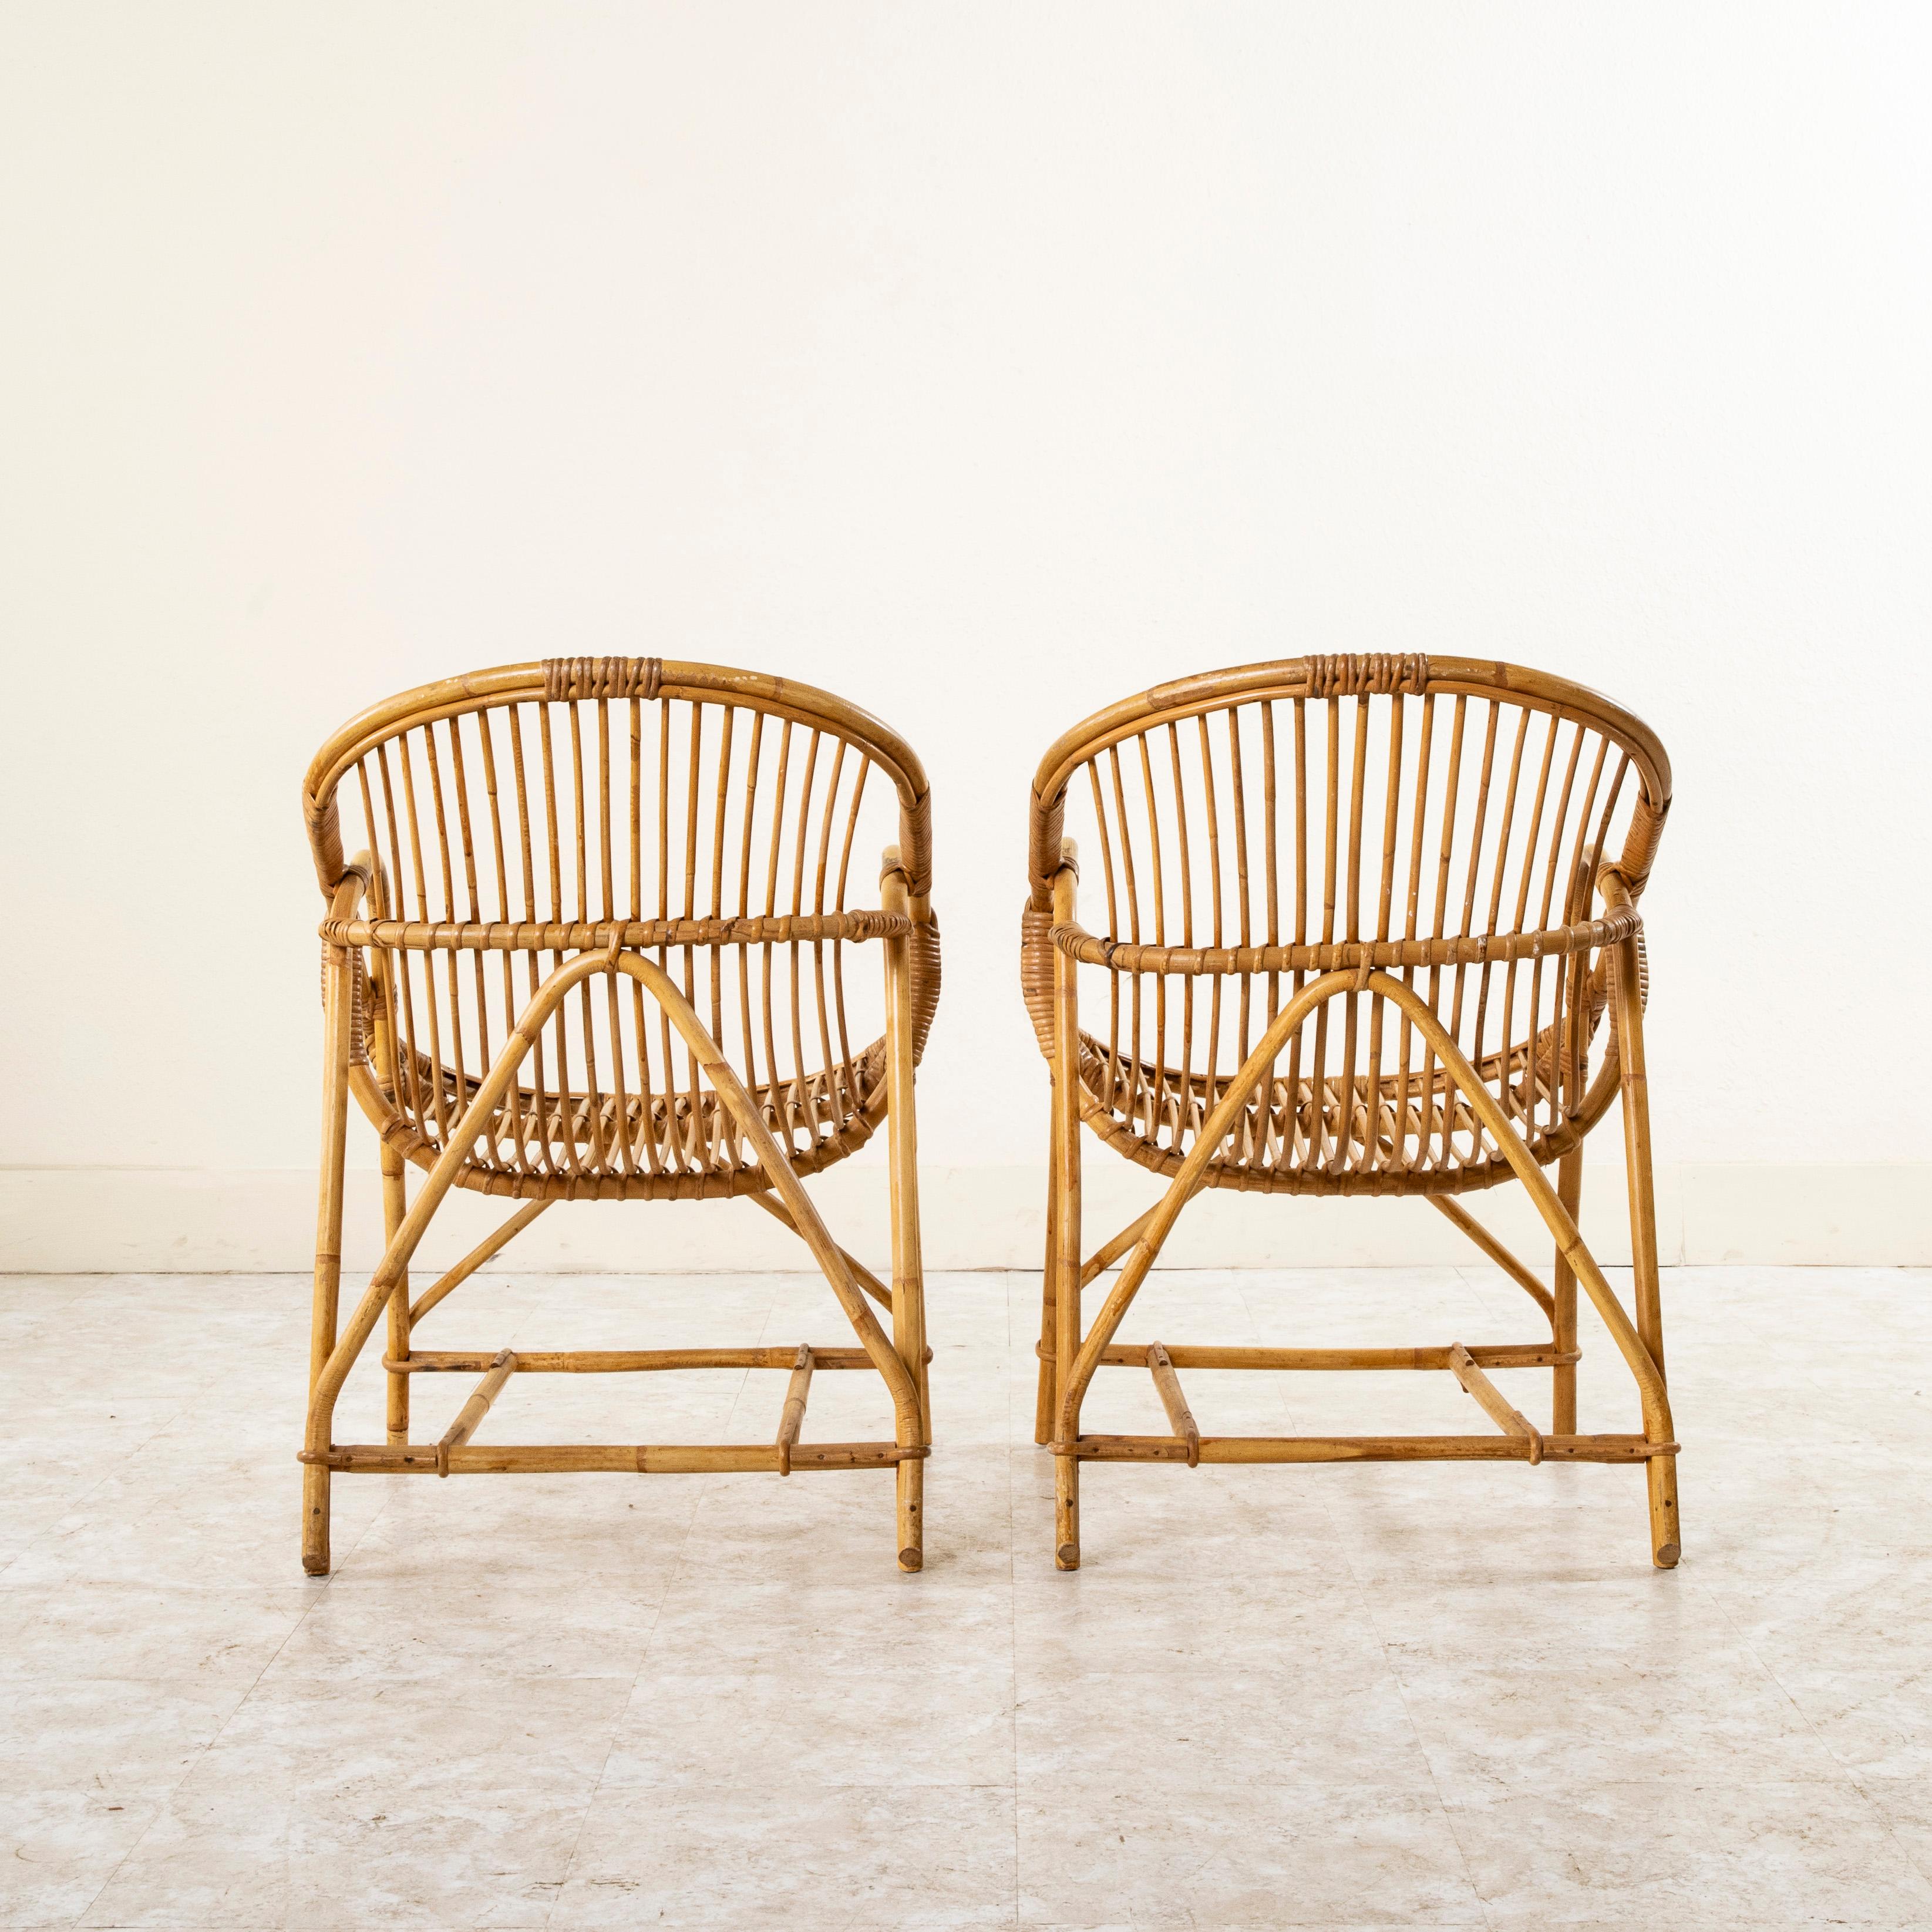 Pair of Mid-20th Century French Rattan Armchairs or Garden Chairs For Sale 1